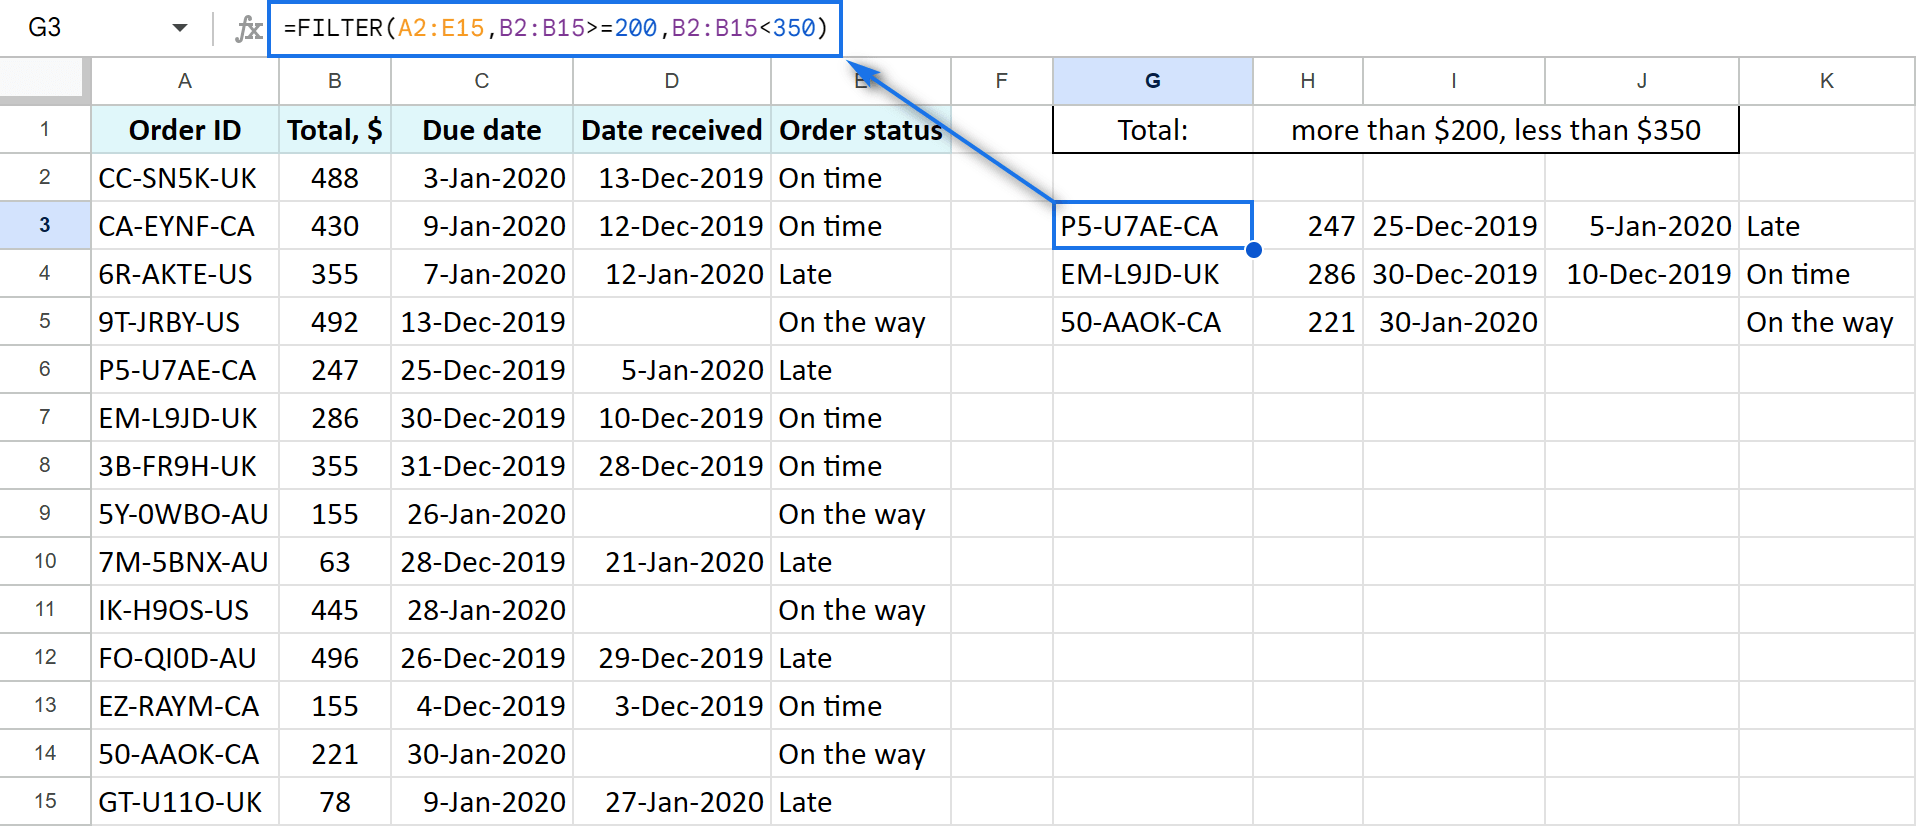 How to filter on Google Sheets with multiple criteria.